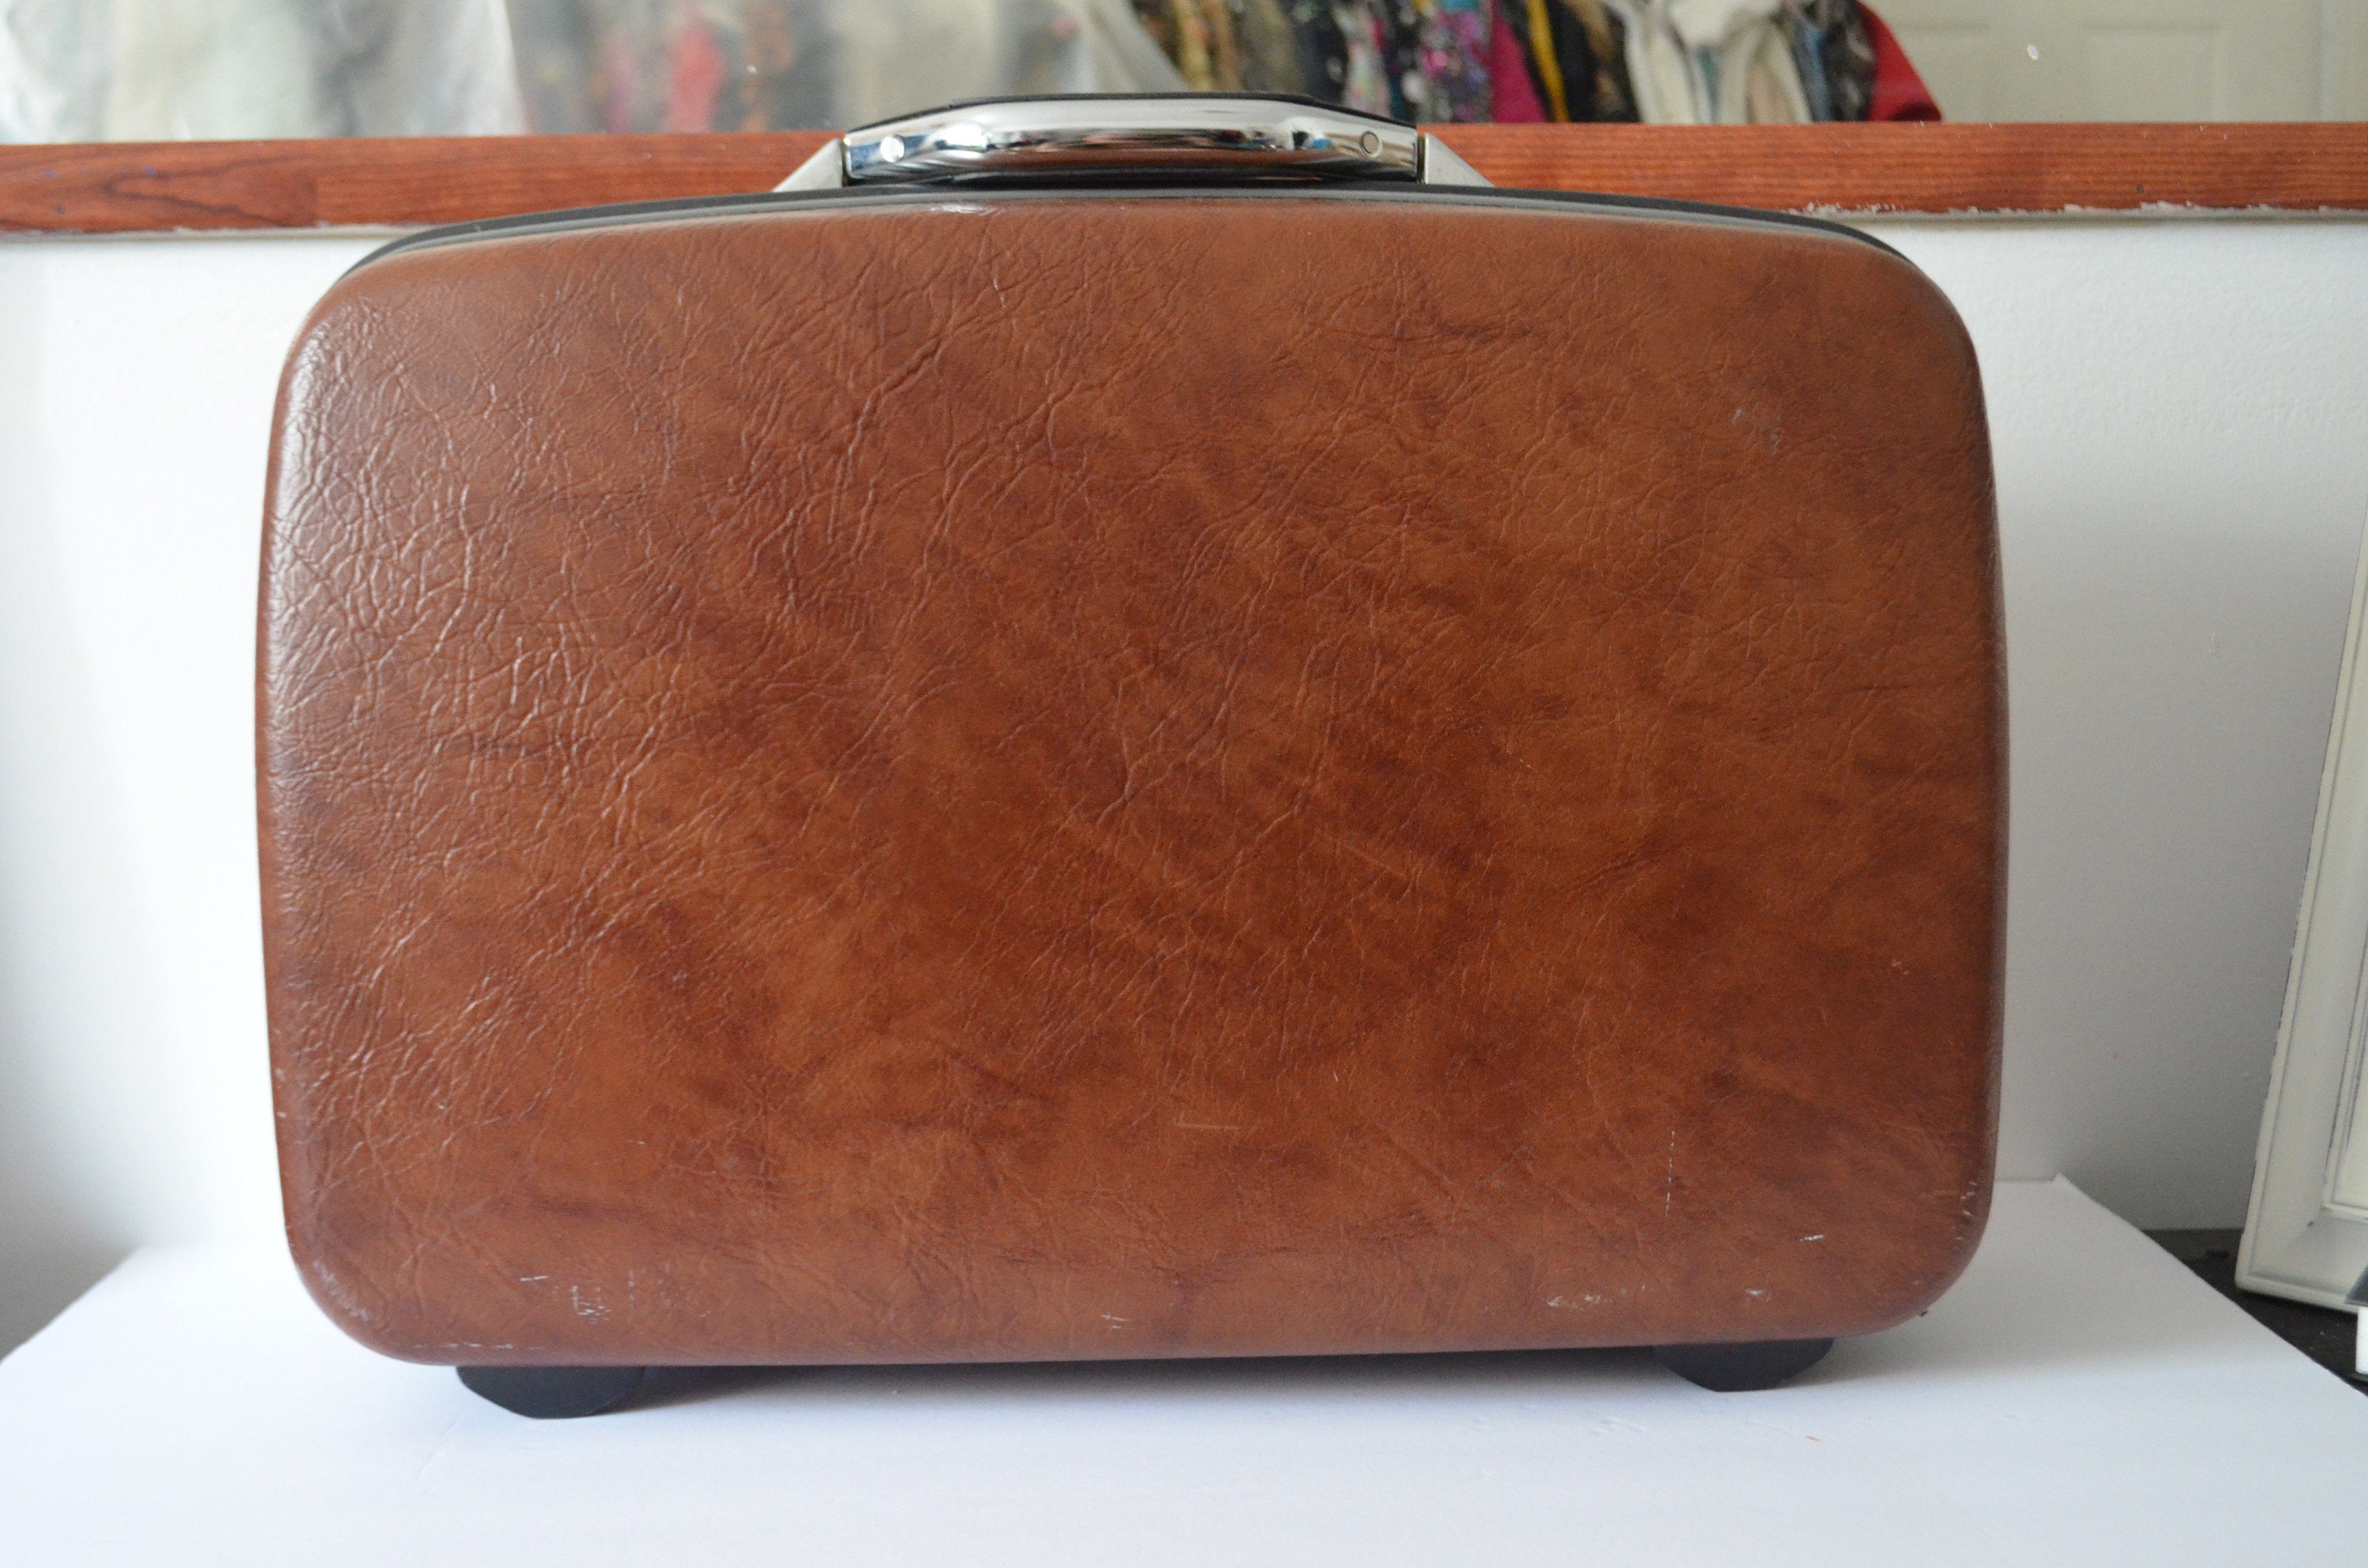 Samsonite Brown Hard Shell Suitcase Train Case Carry On Airplane Overnight Luggage Short Trips